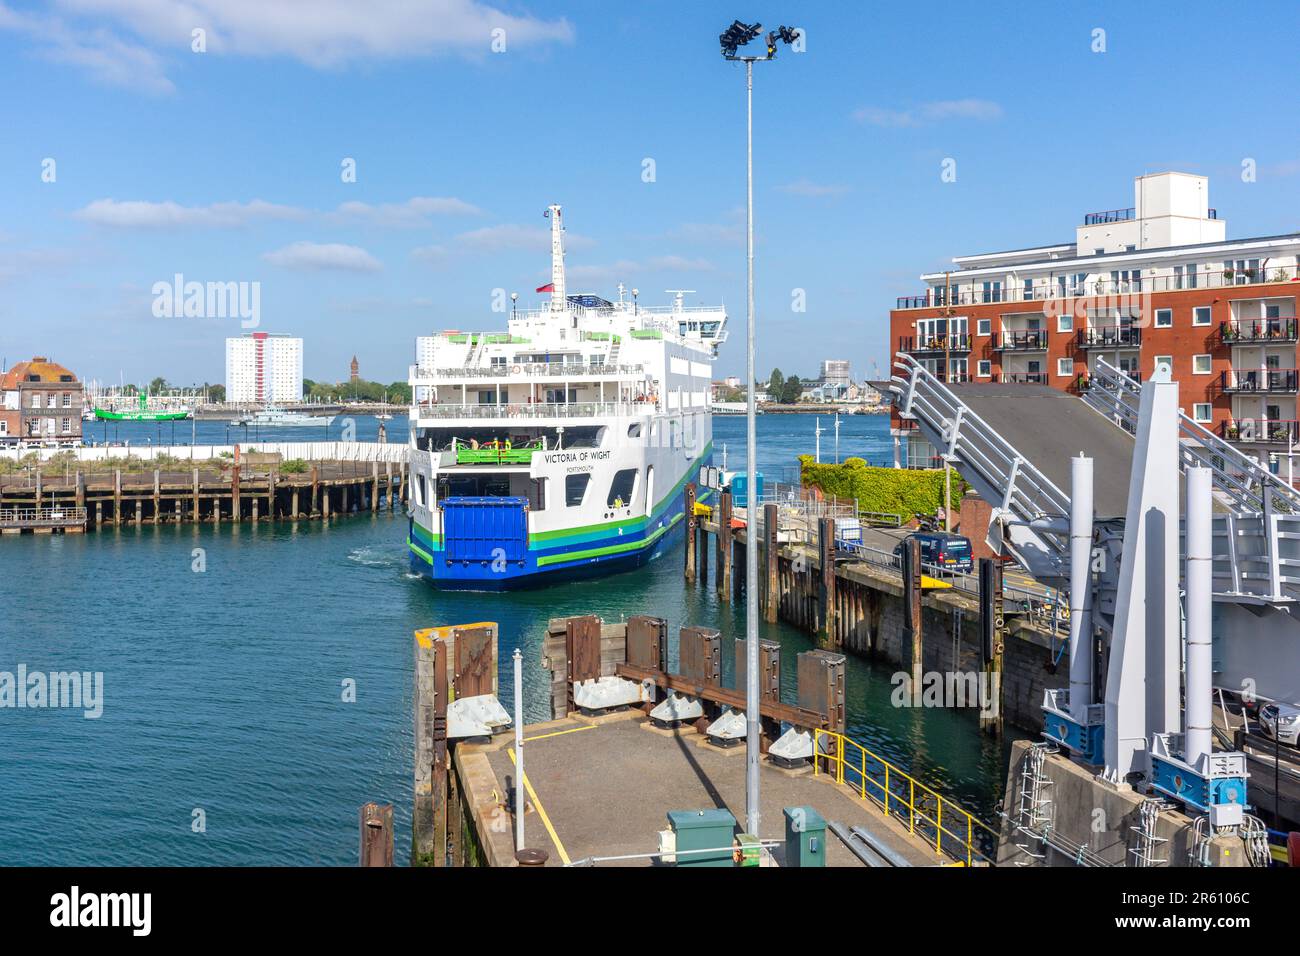 Victoria de Wight WightLink Ferry approchant le terminal Wightlink Gunwharf, Portsmouth, Hampshire, Angleterre, Royaume-Uni Banque D'Images